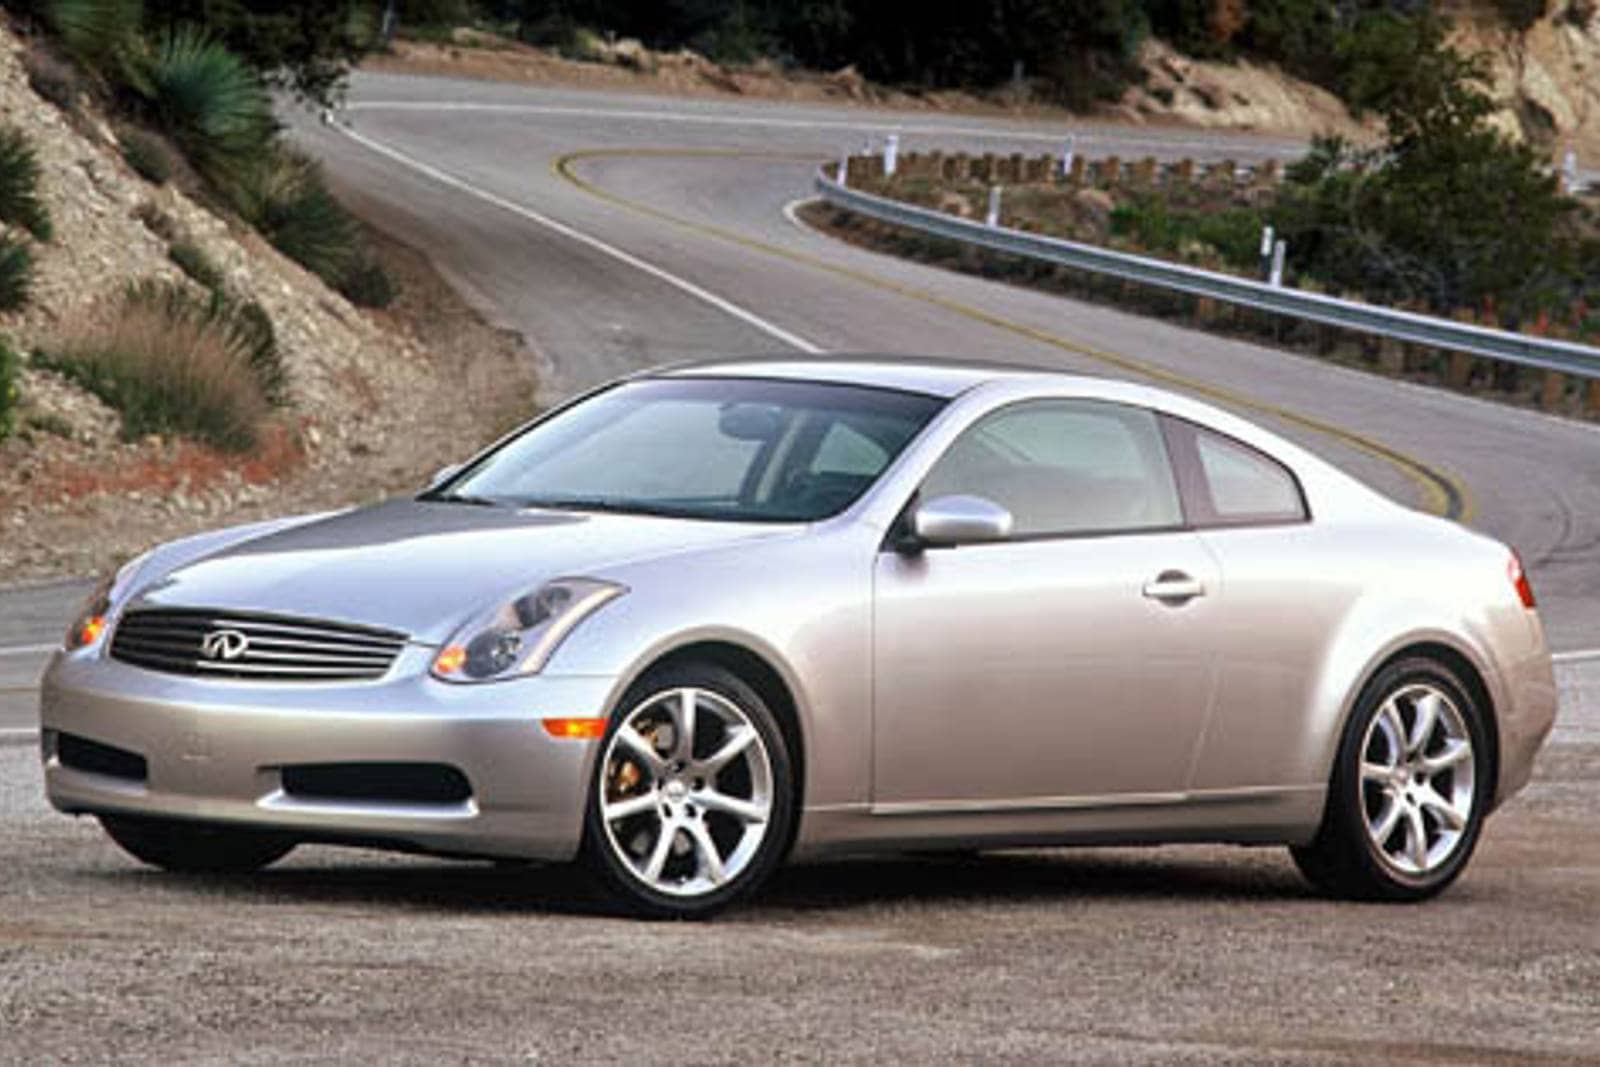 Used 2003 INFINITI G35 Coupe Review | Edmunds